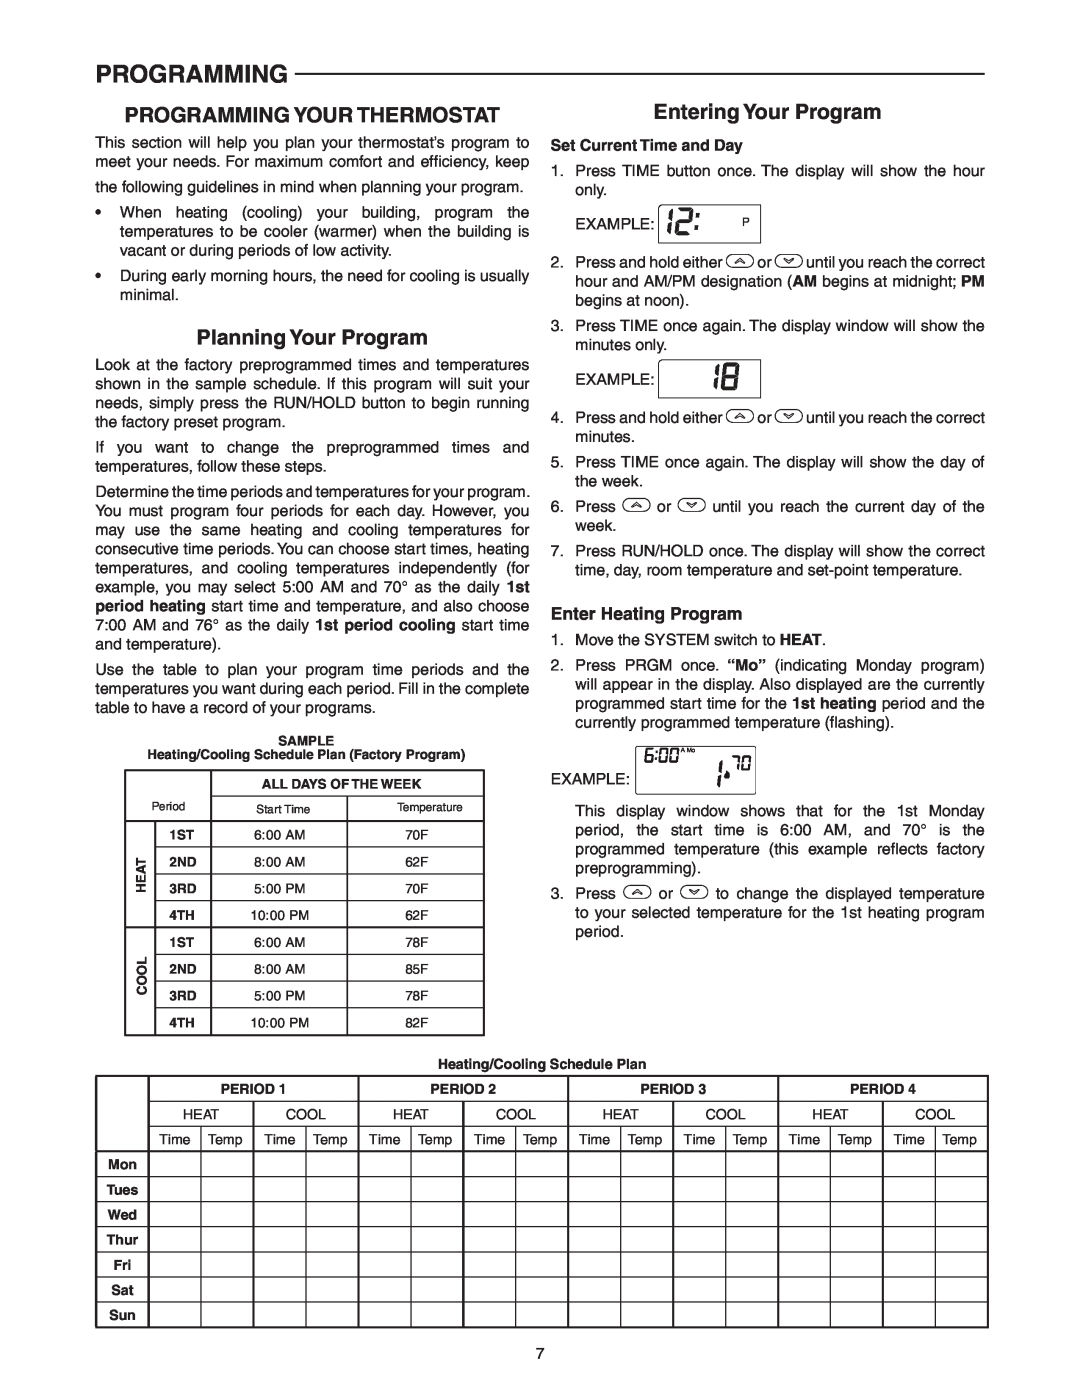 White Rodgers 1F87-0261 specifications Programming Your Thermostat, Planning Your Program, Entering Your Program 